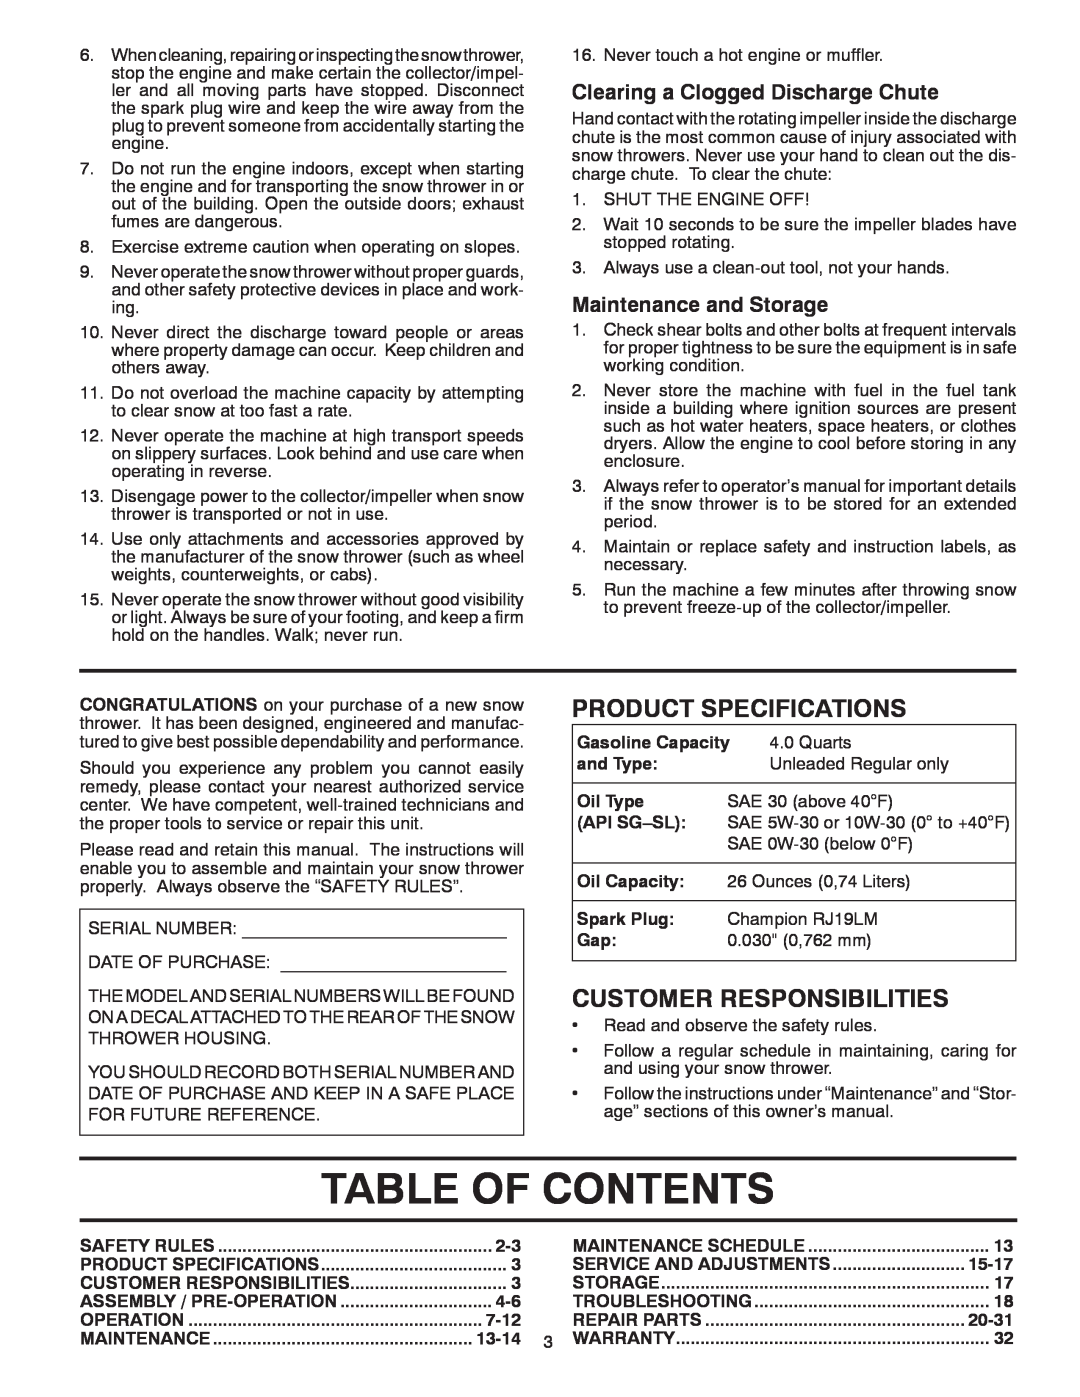 Poulan 419002 Table Of Contents, Product Specifications, Customer Responsibilities, Clearing a Clogged Discharge Chute 